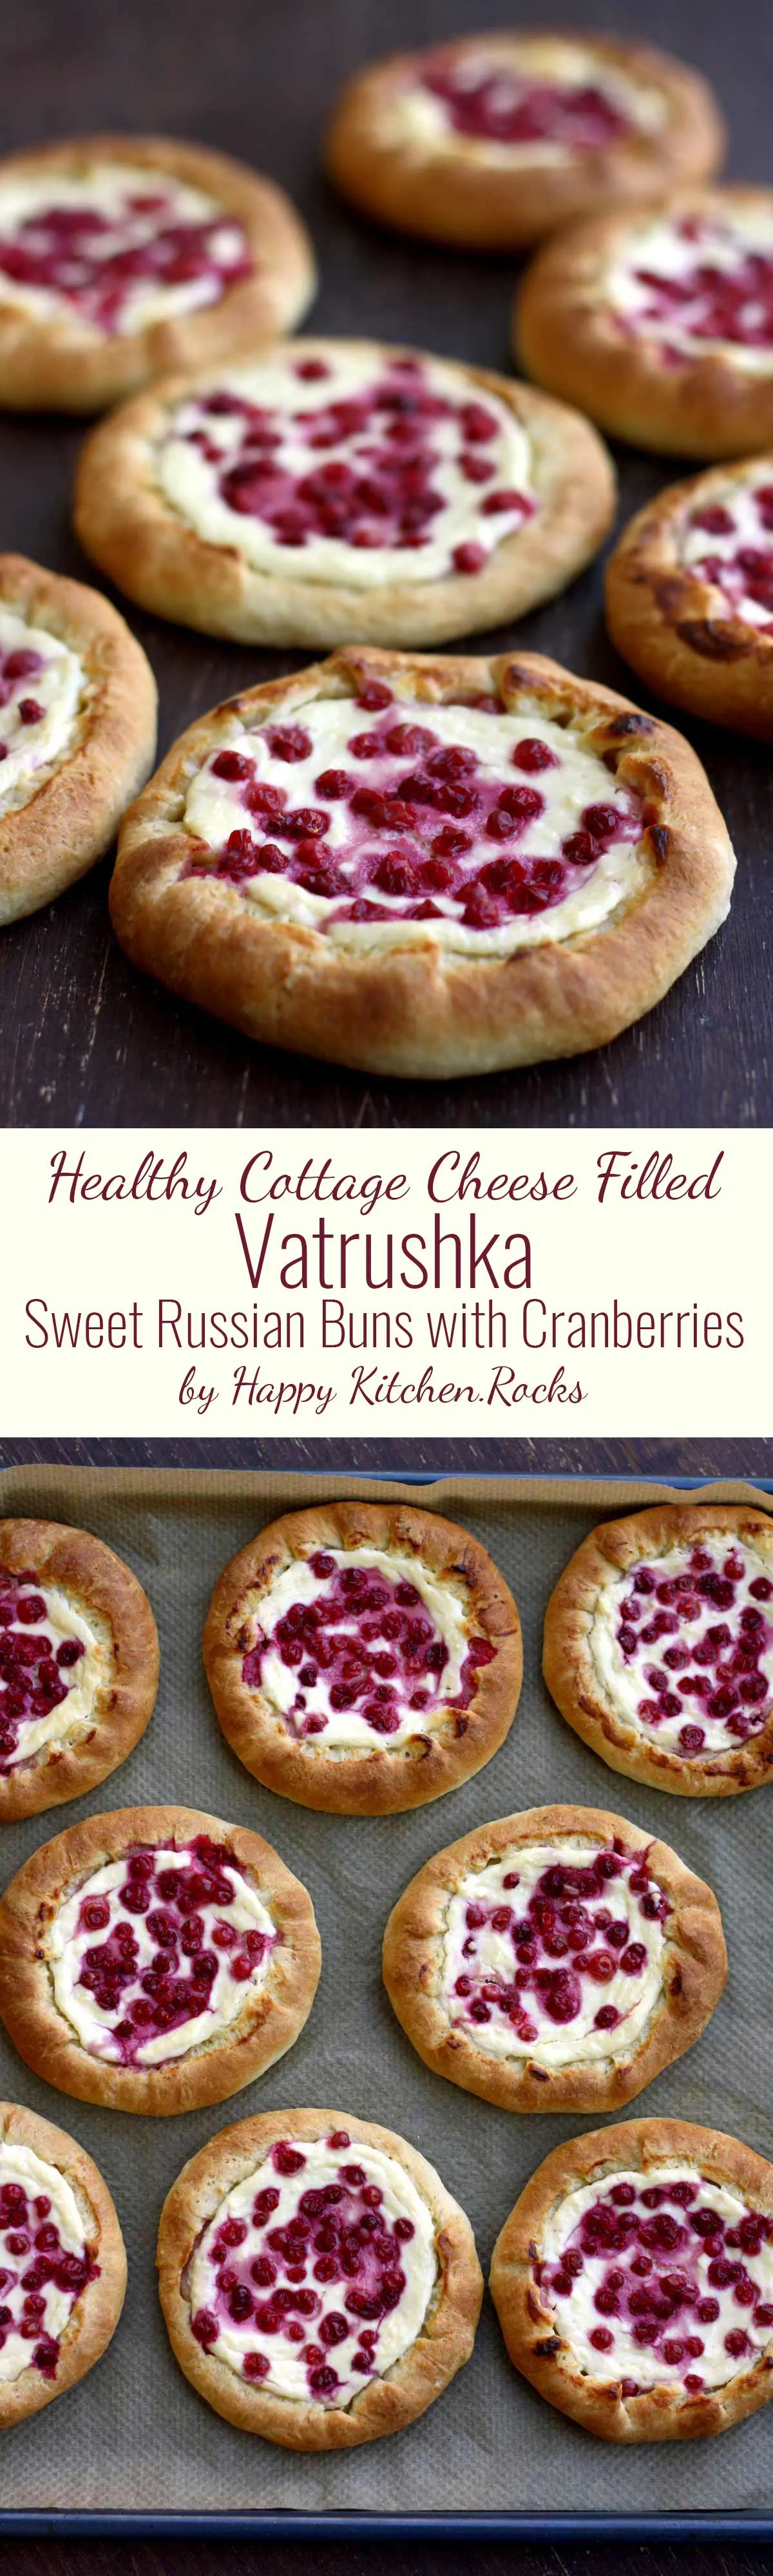 Vatrushka Sweet Russian Farmer's Cheese Buns with Tea - Super Long Collage with Text Overlay